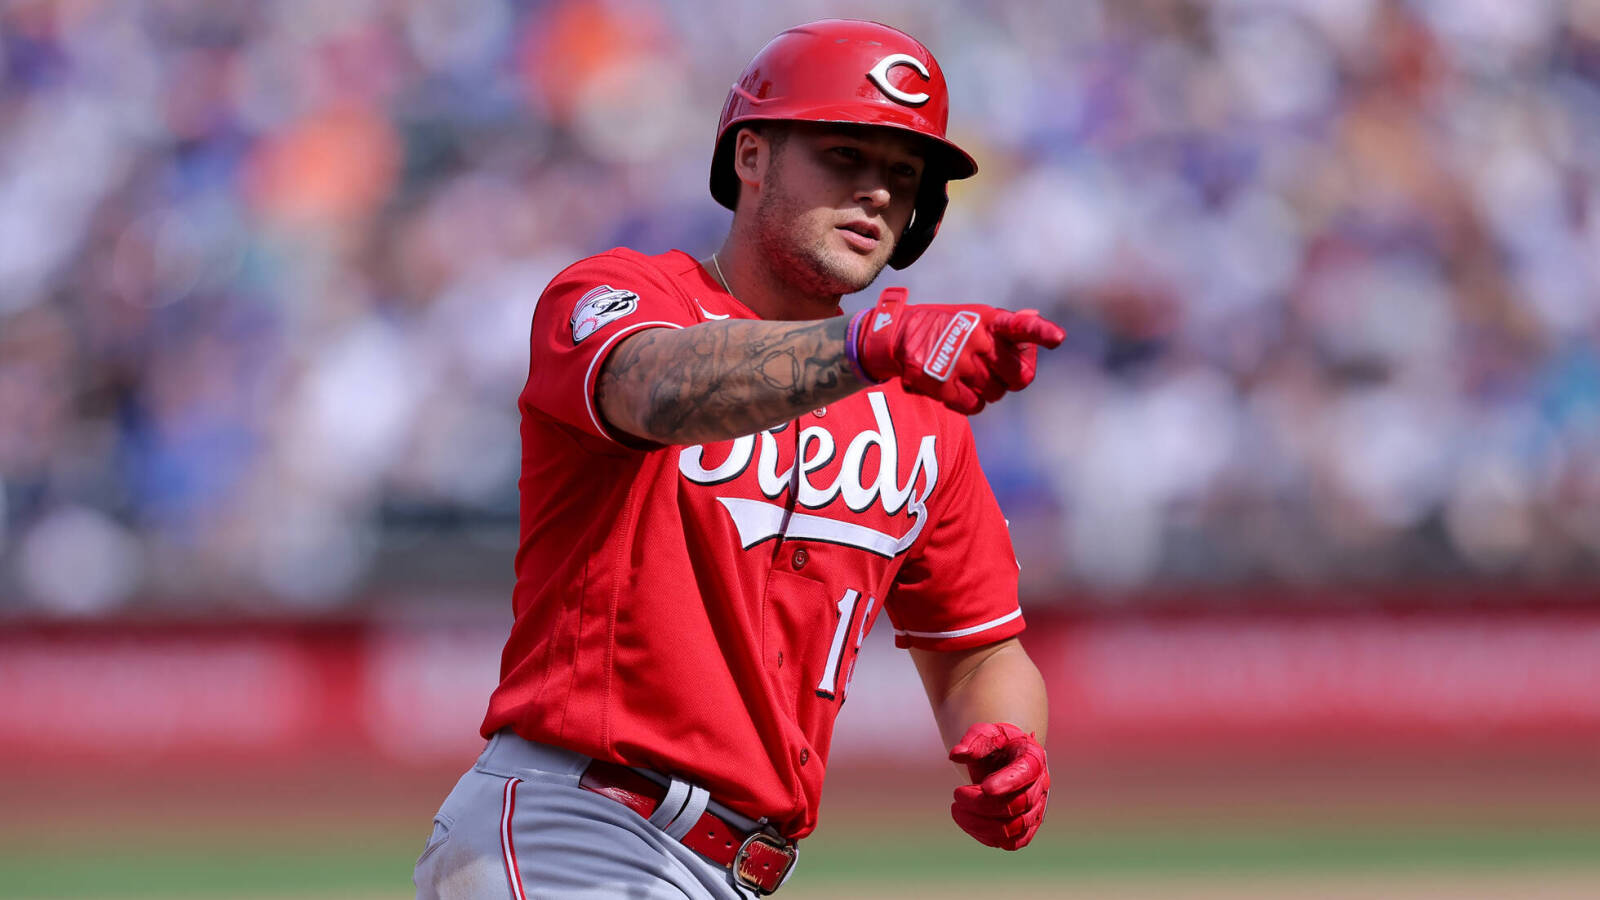 Former No. 2 overall pick posts farewell to Reds